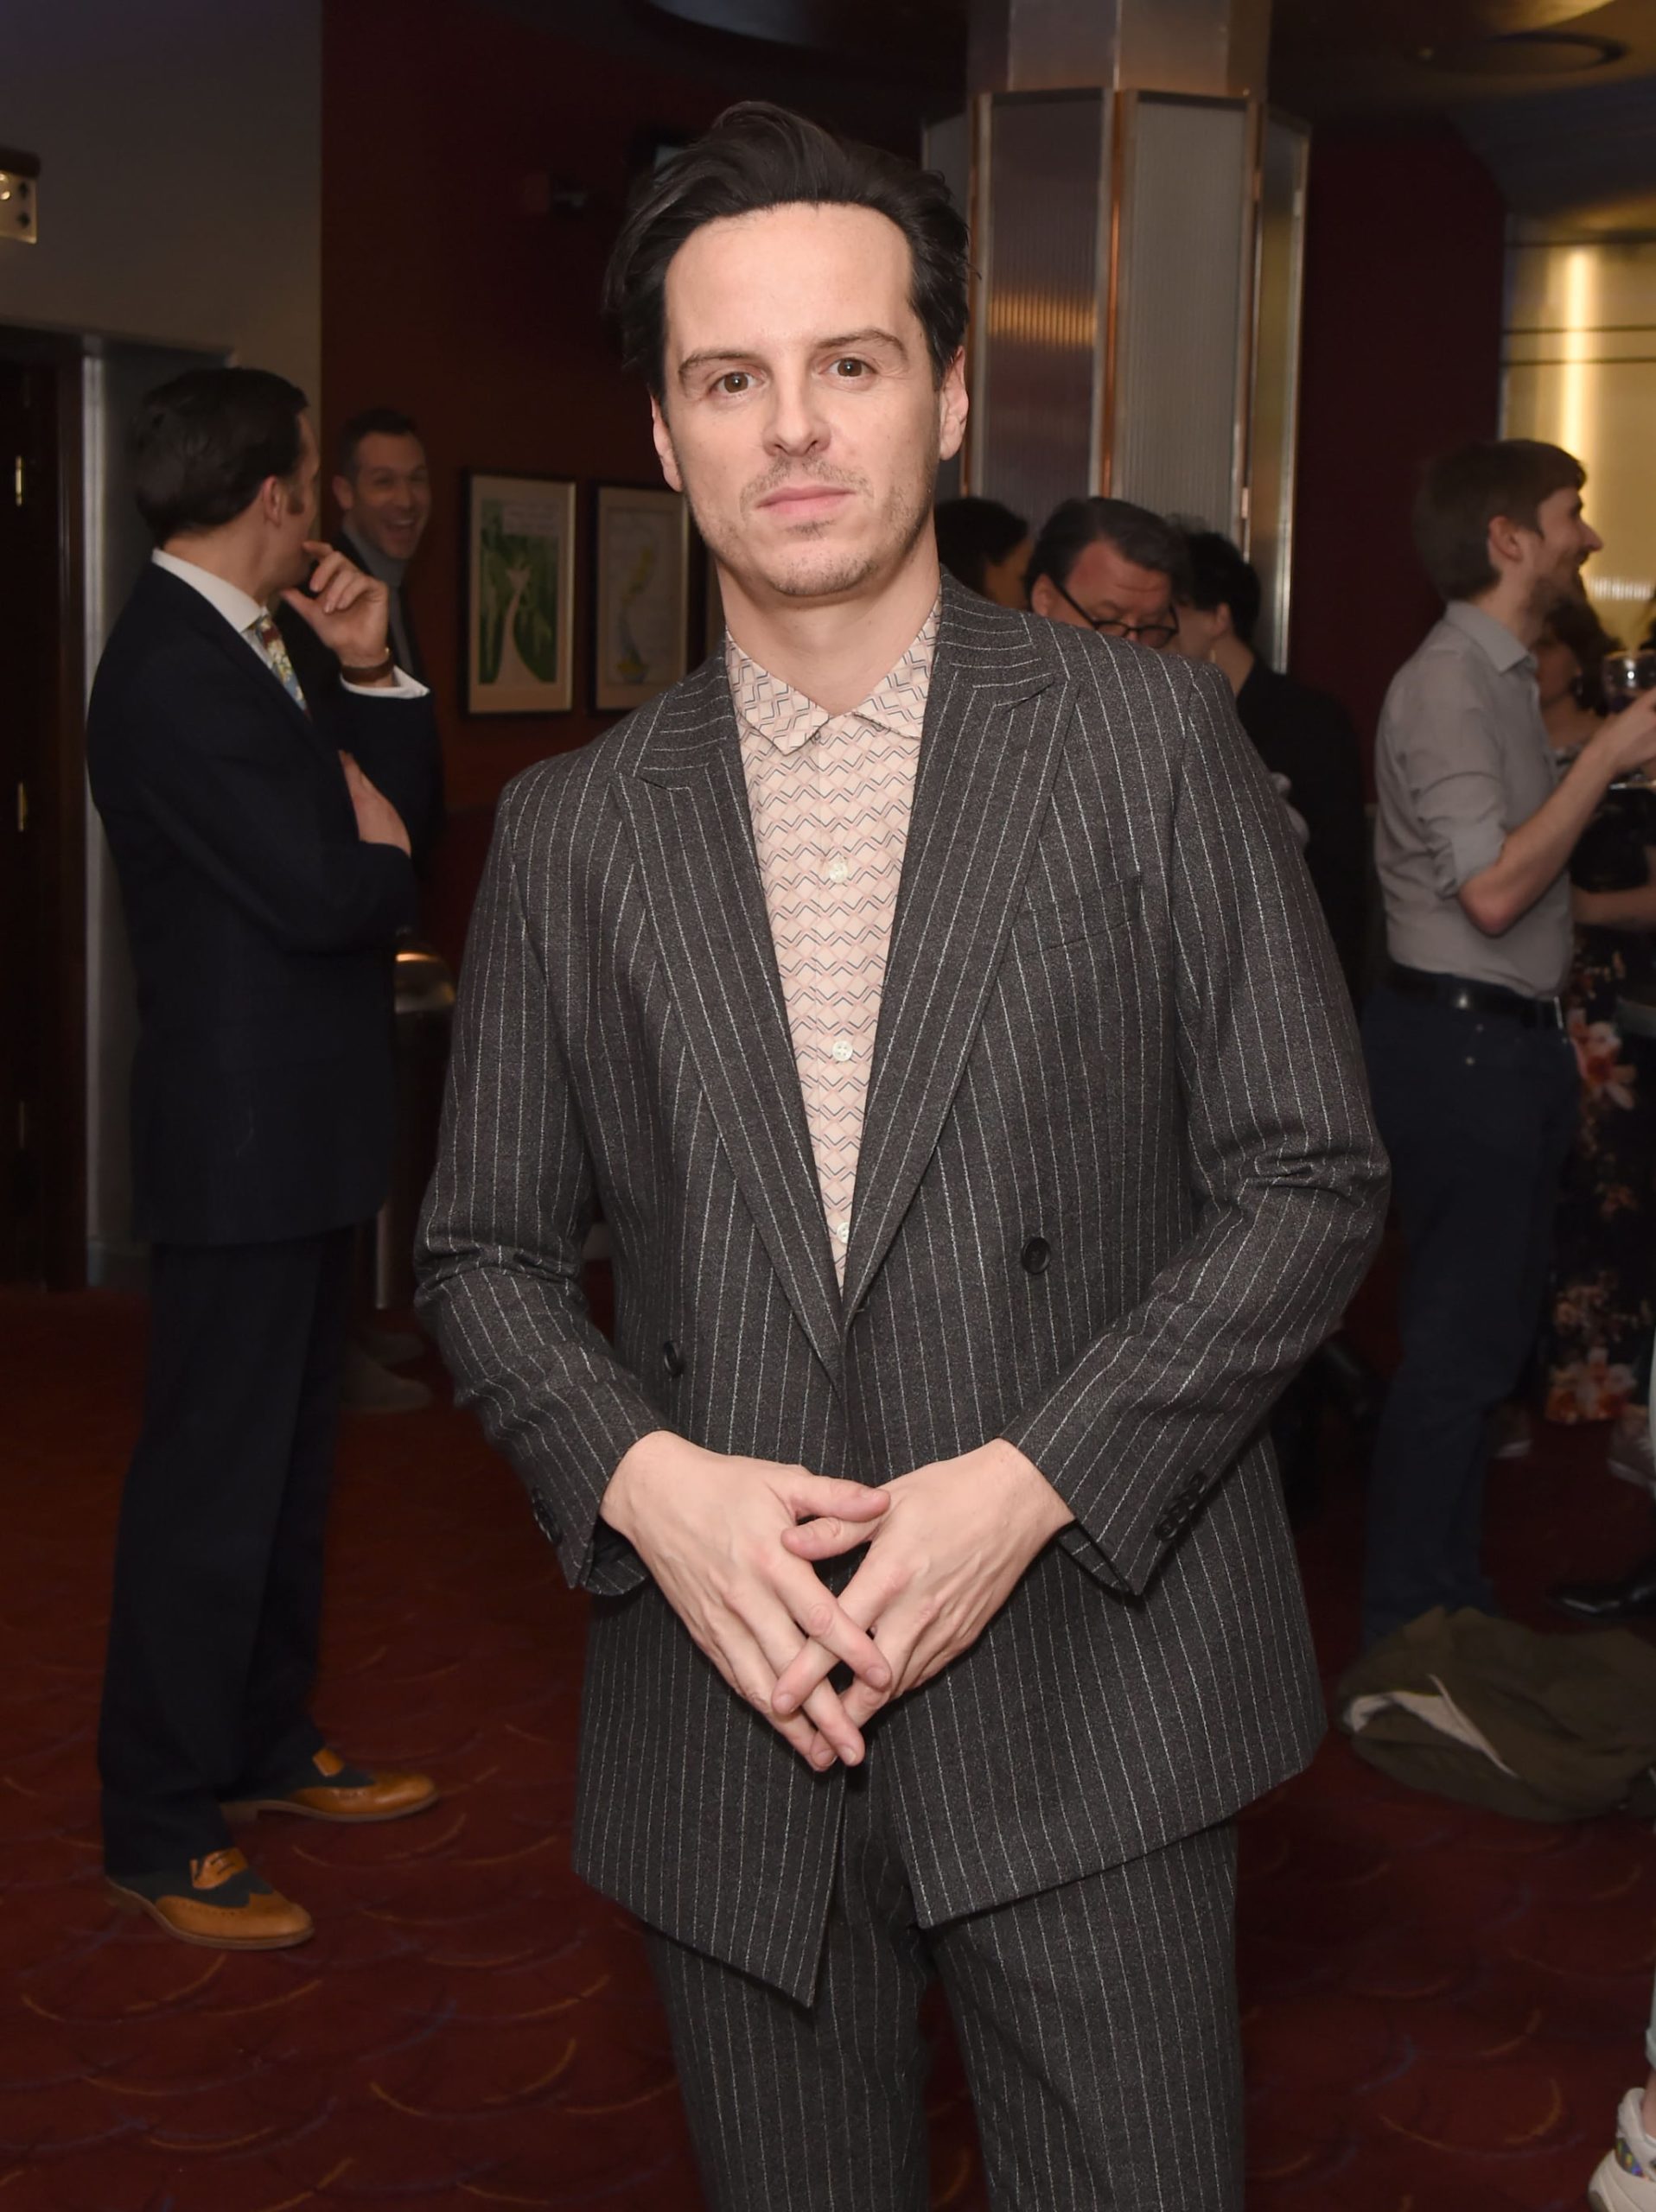 LONDON, ENGLAND - MARCH 01:  Andrew Scott attends The WhatsOnStage Awards 2020 at The Prince of Wales Theatre on March 1, 2020 in London, England.  (Photo by David M. Benett/Dave Benett/Getty Images)